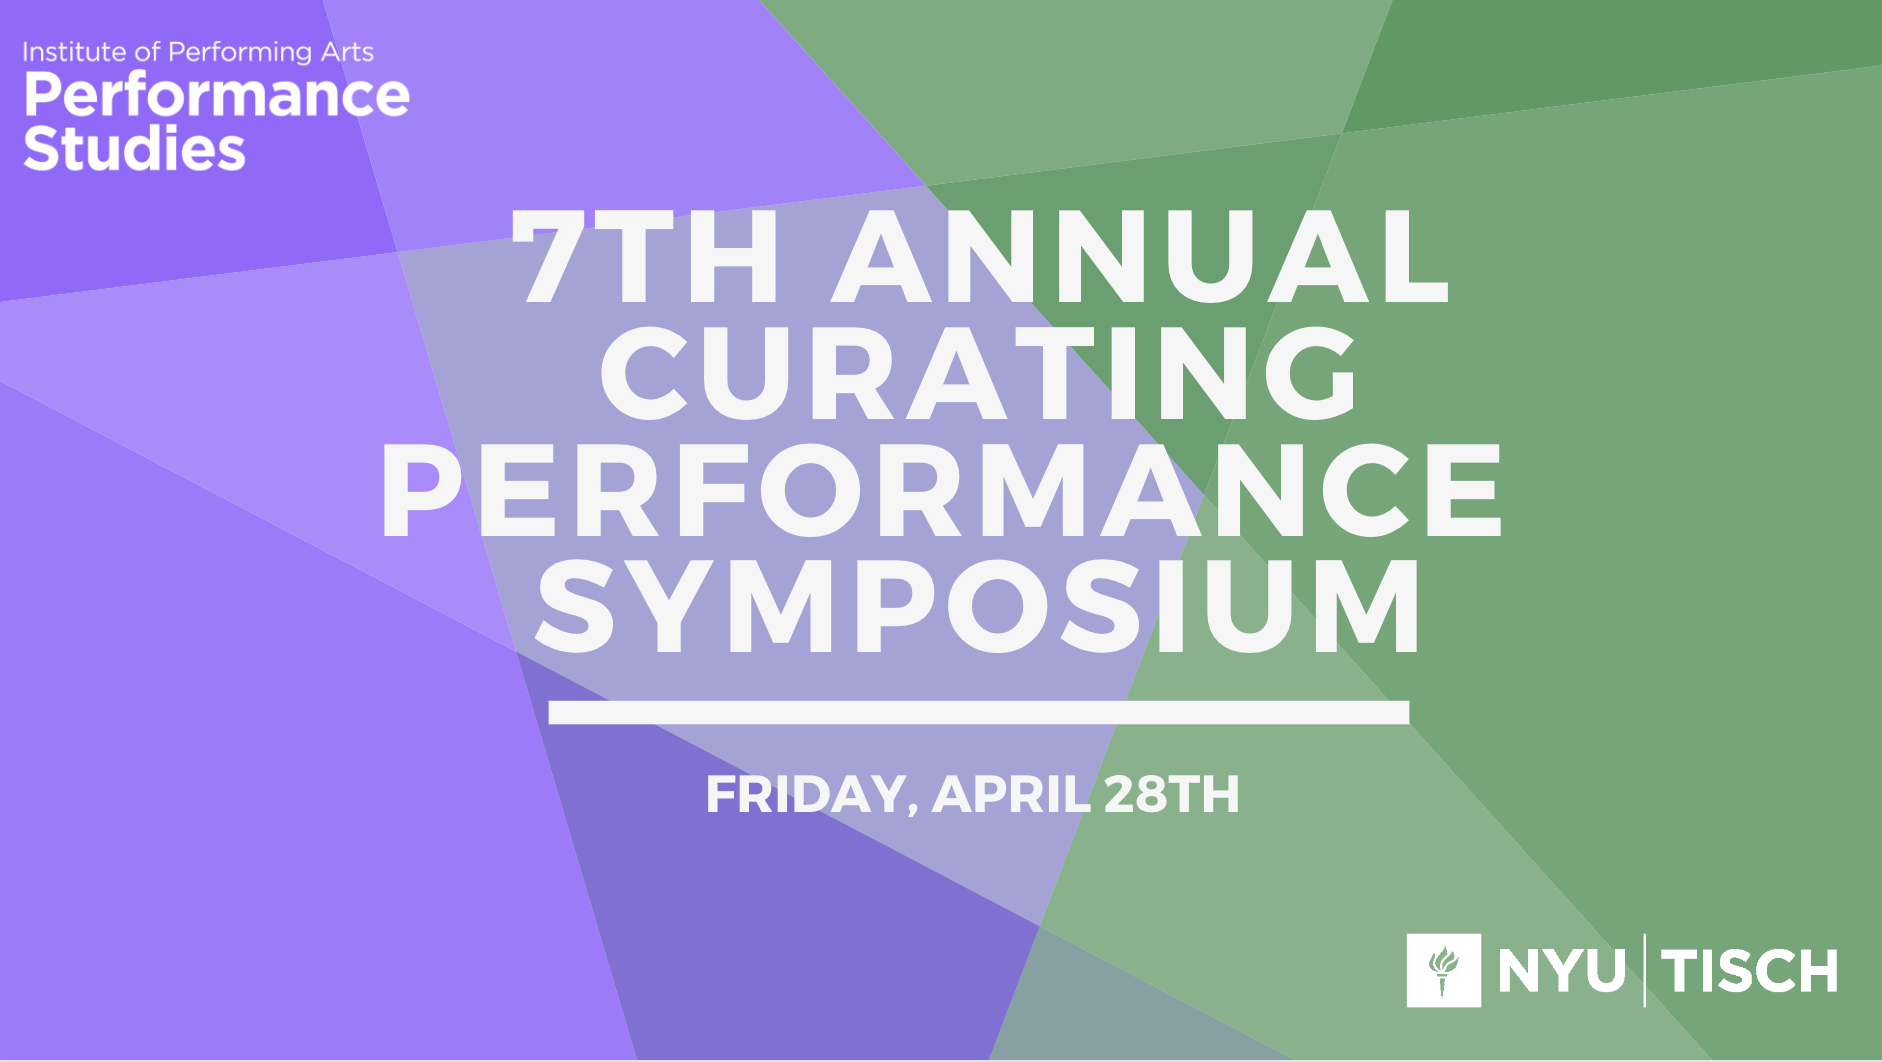 7th annual curating performance symposium graphic 